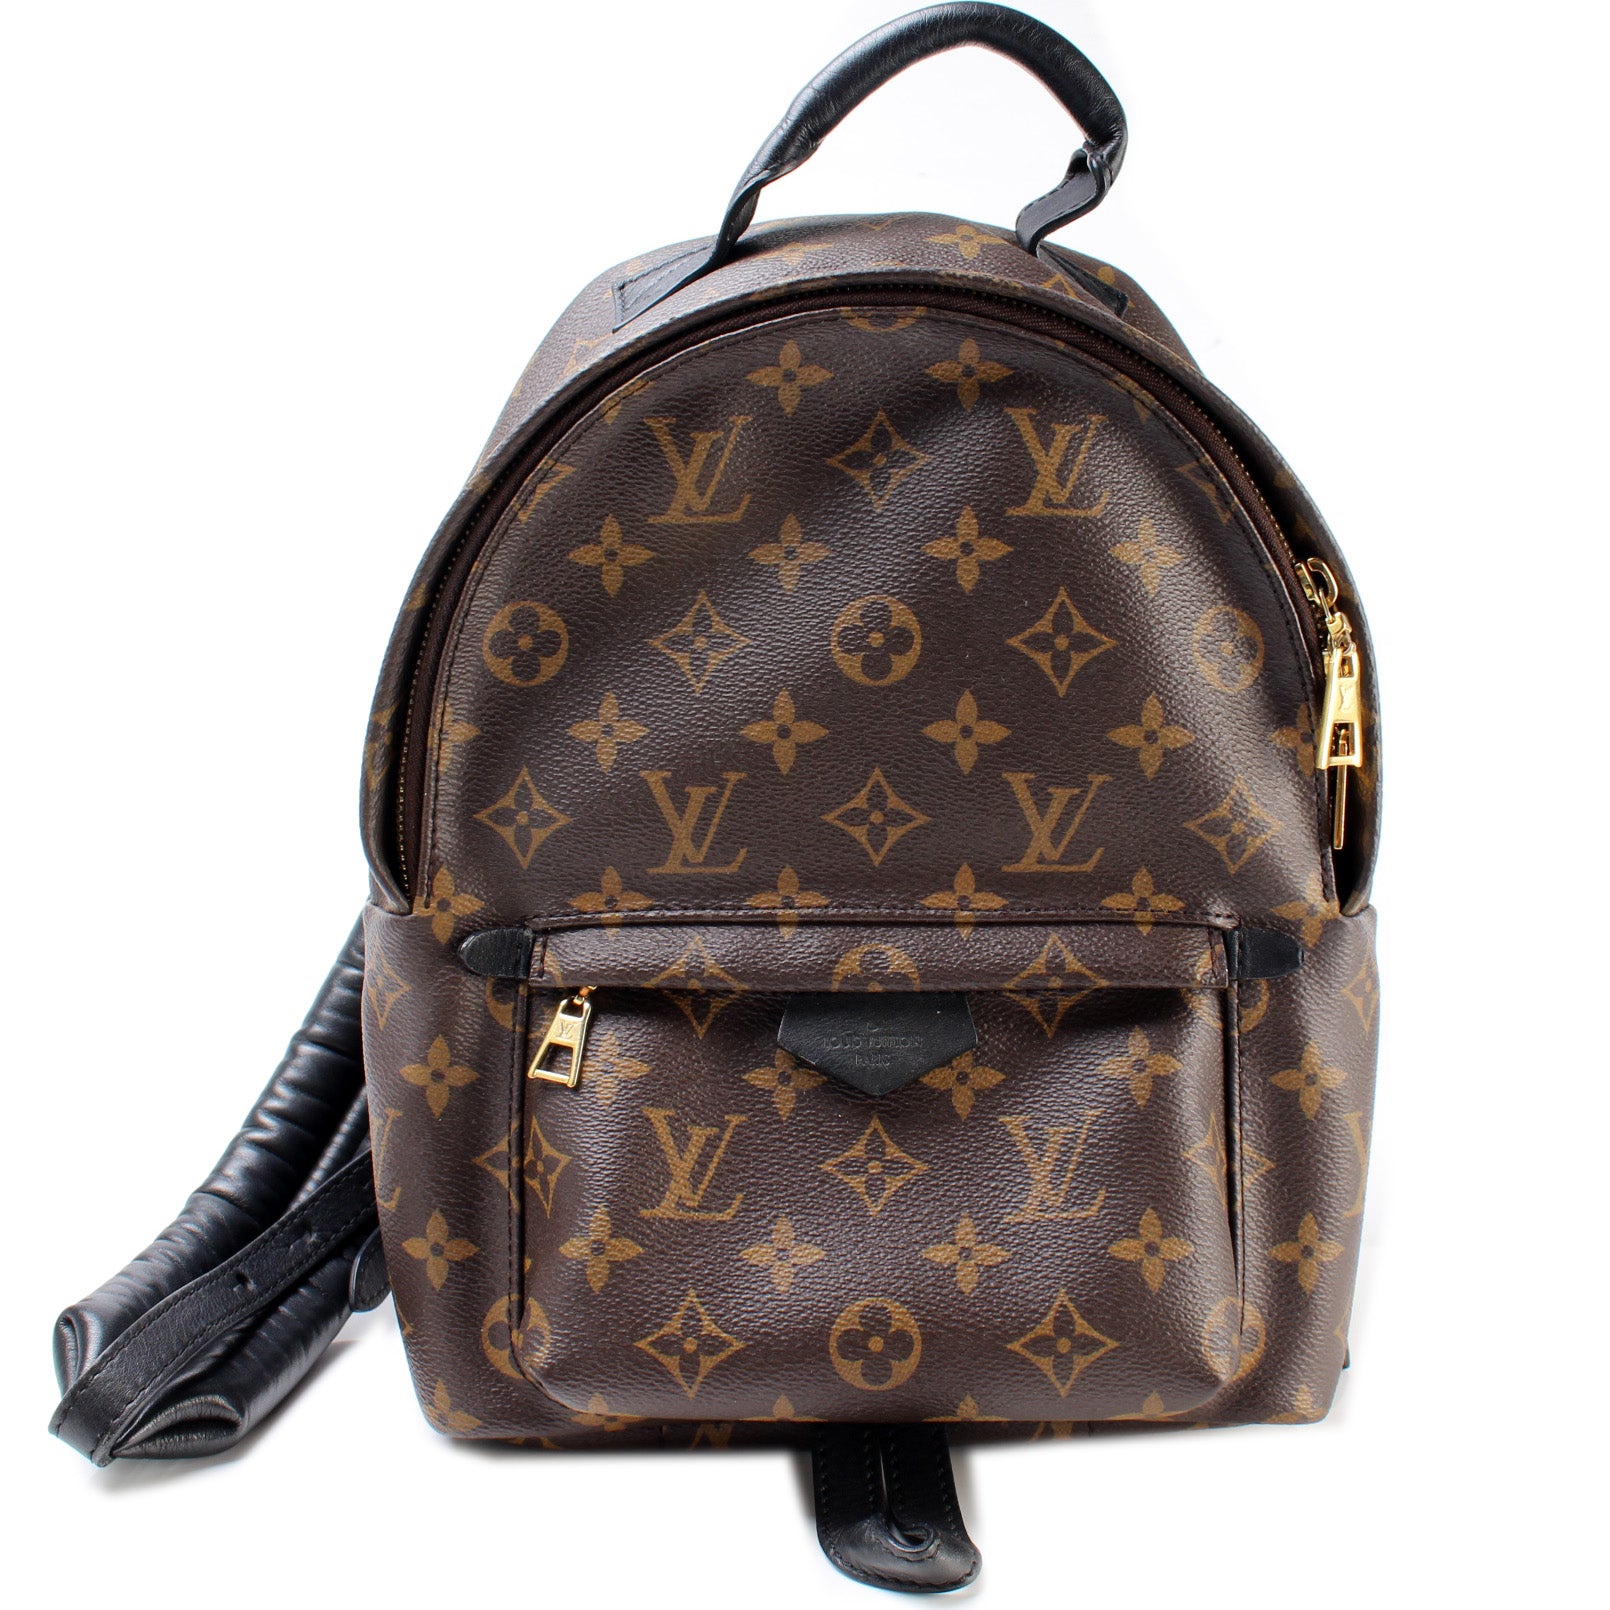 Louis Vuitton Palm Springs leather backpack